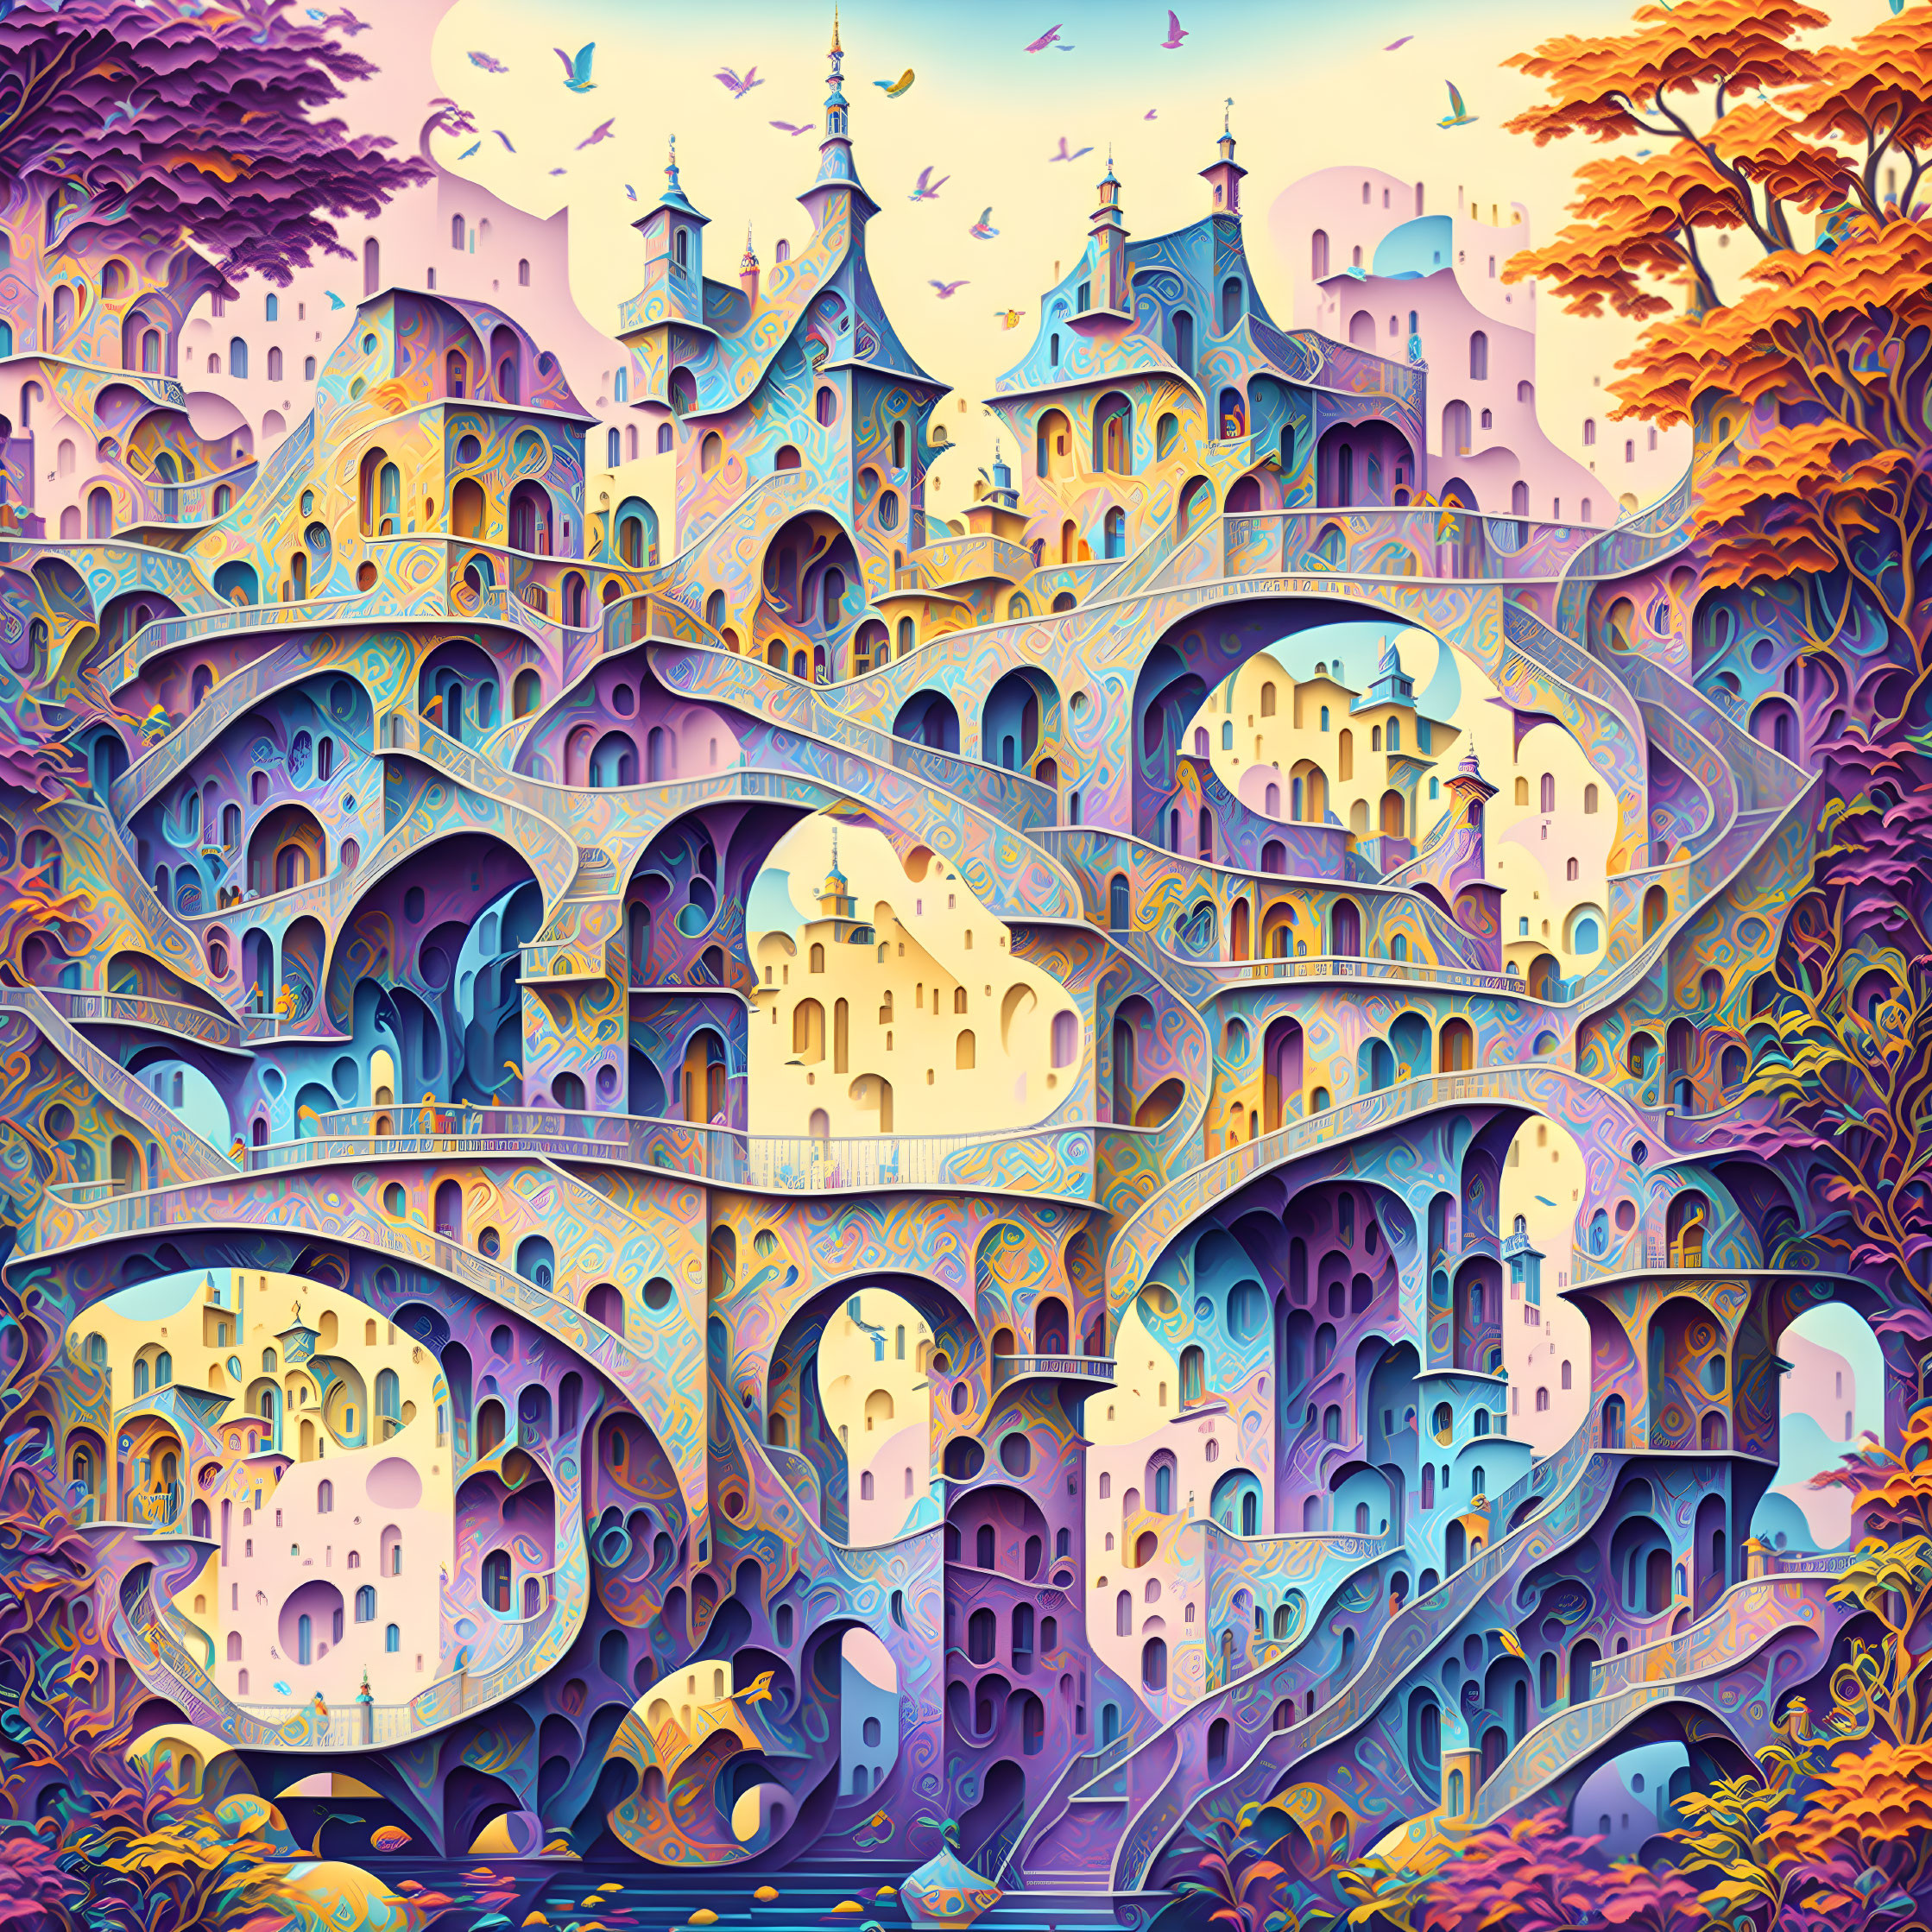 Colorful surreal artwork of a whimsical cityscape with intricate architecture.